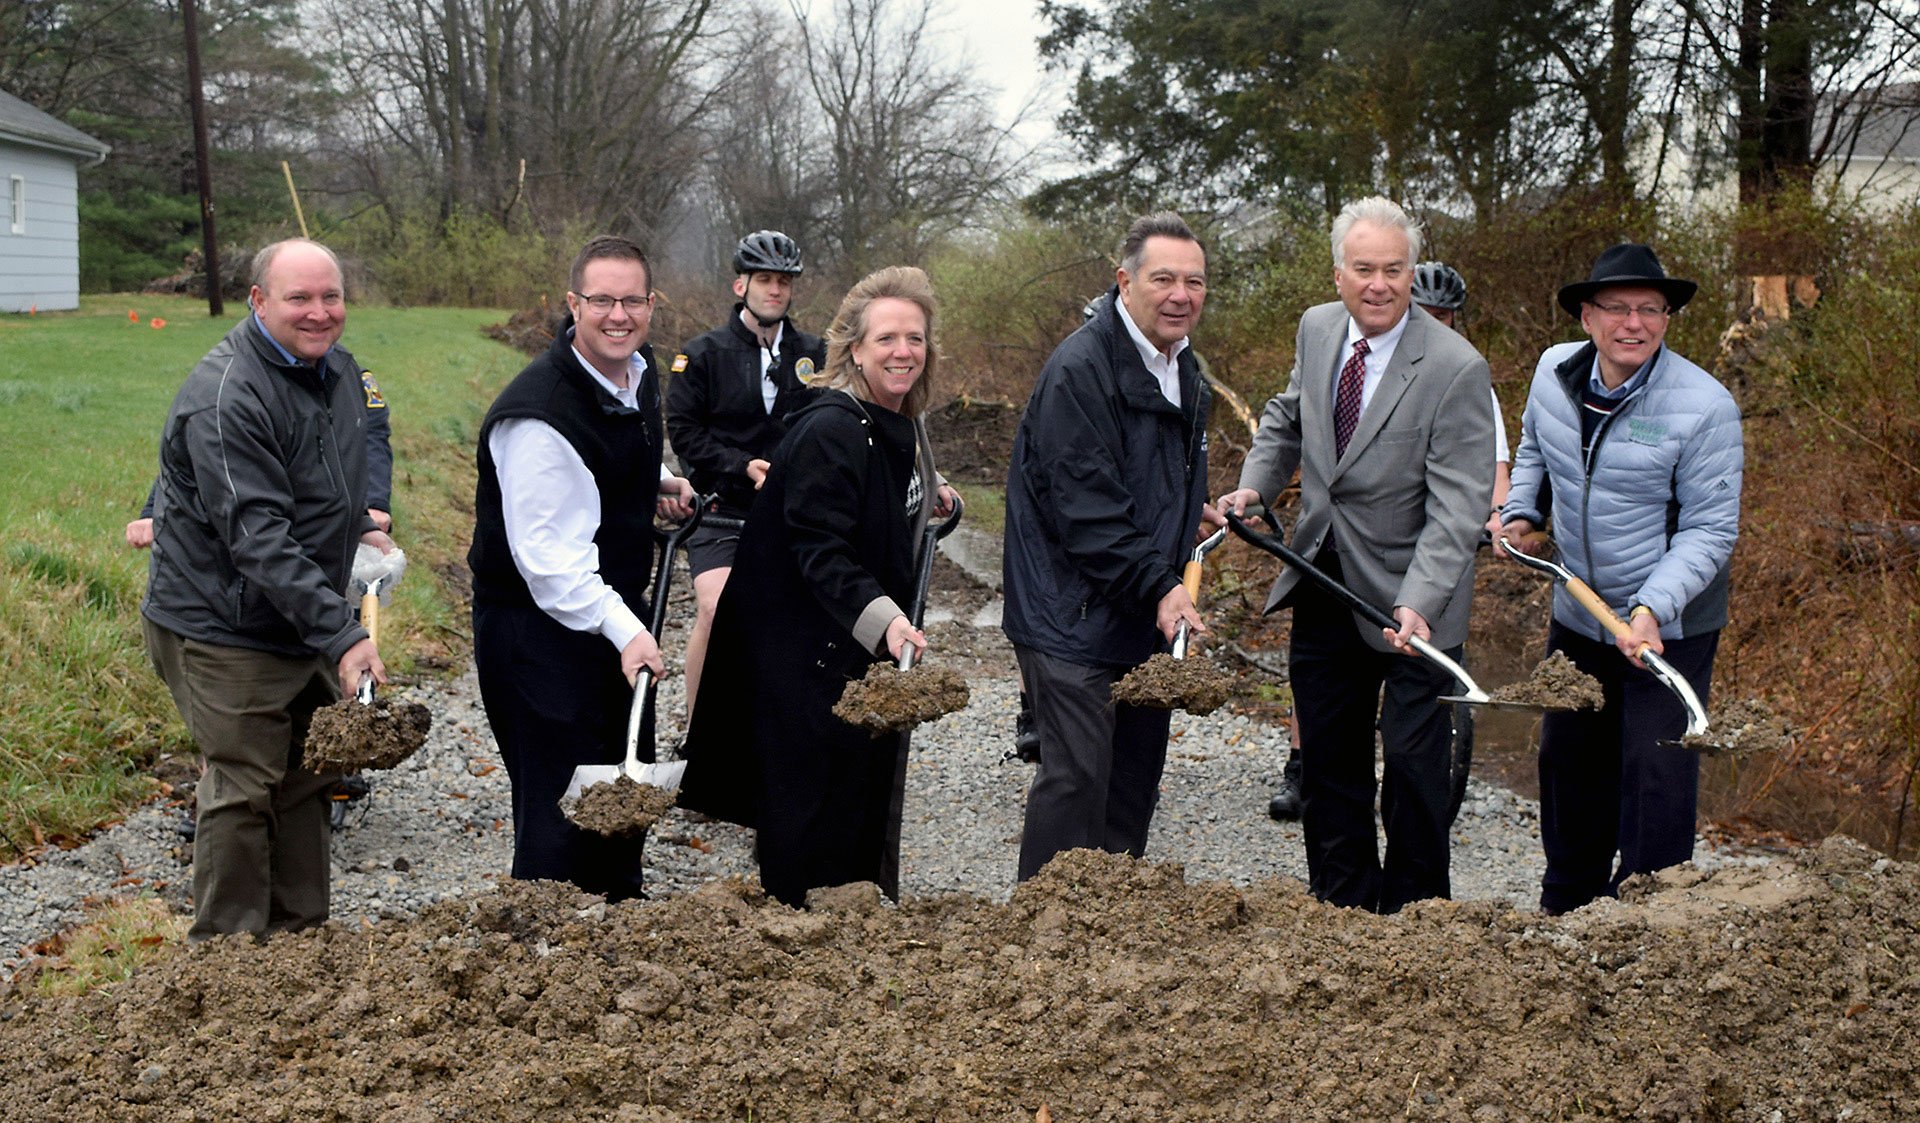 Noblesville Breaks Ground On Midland Trace Trail